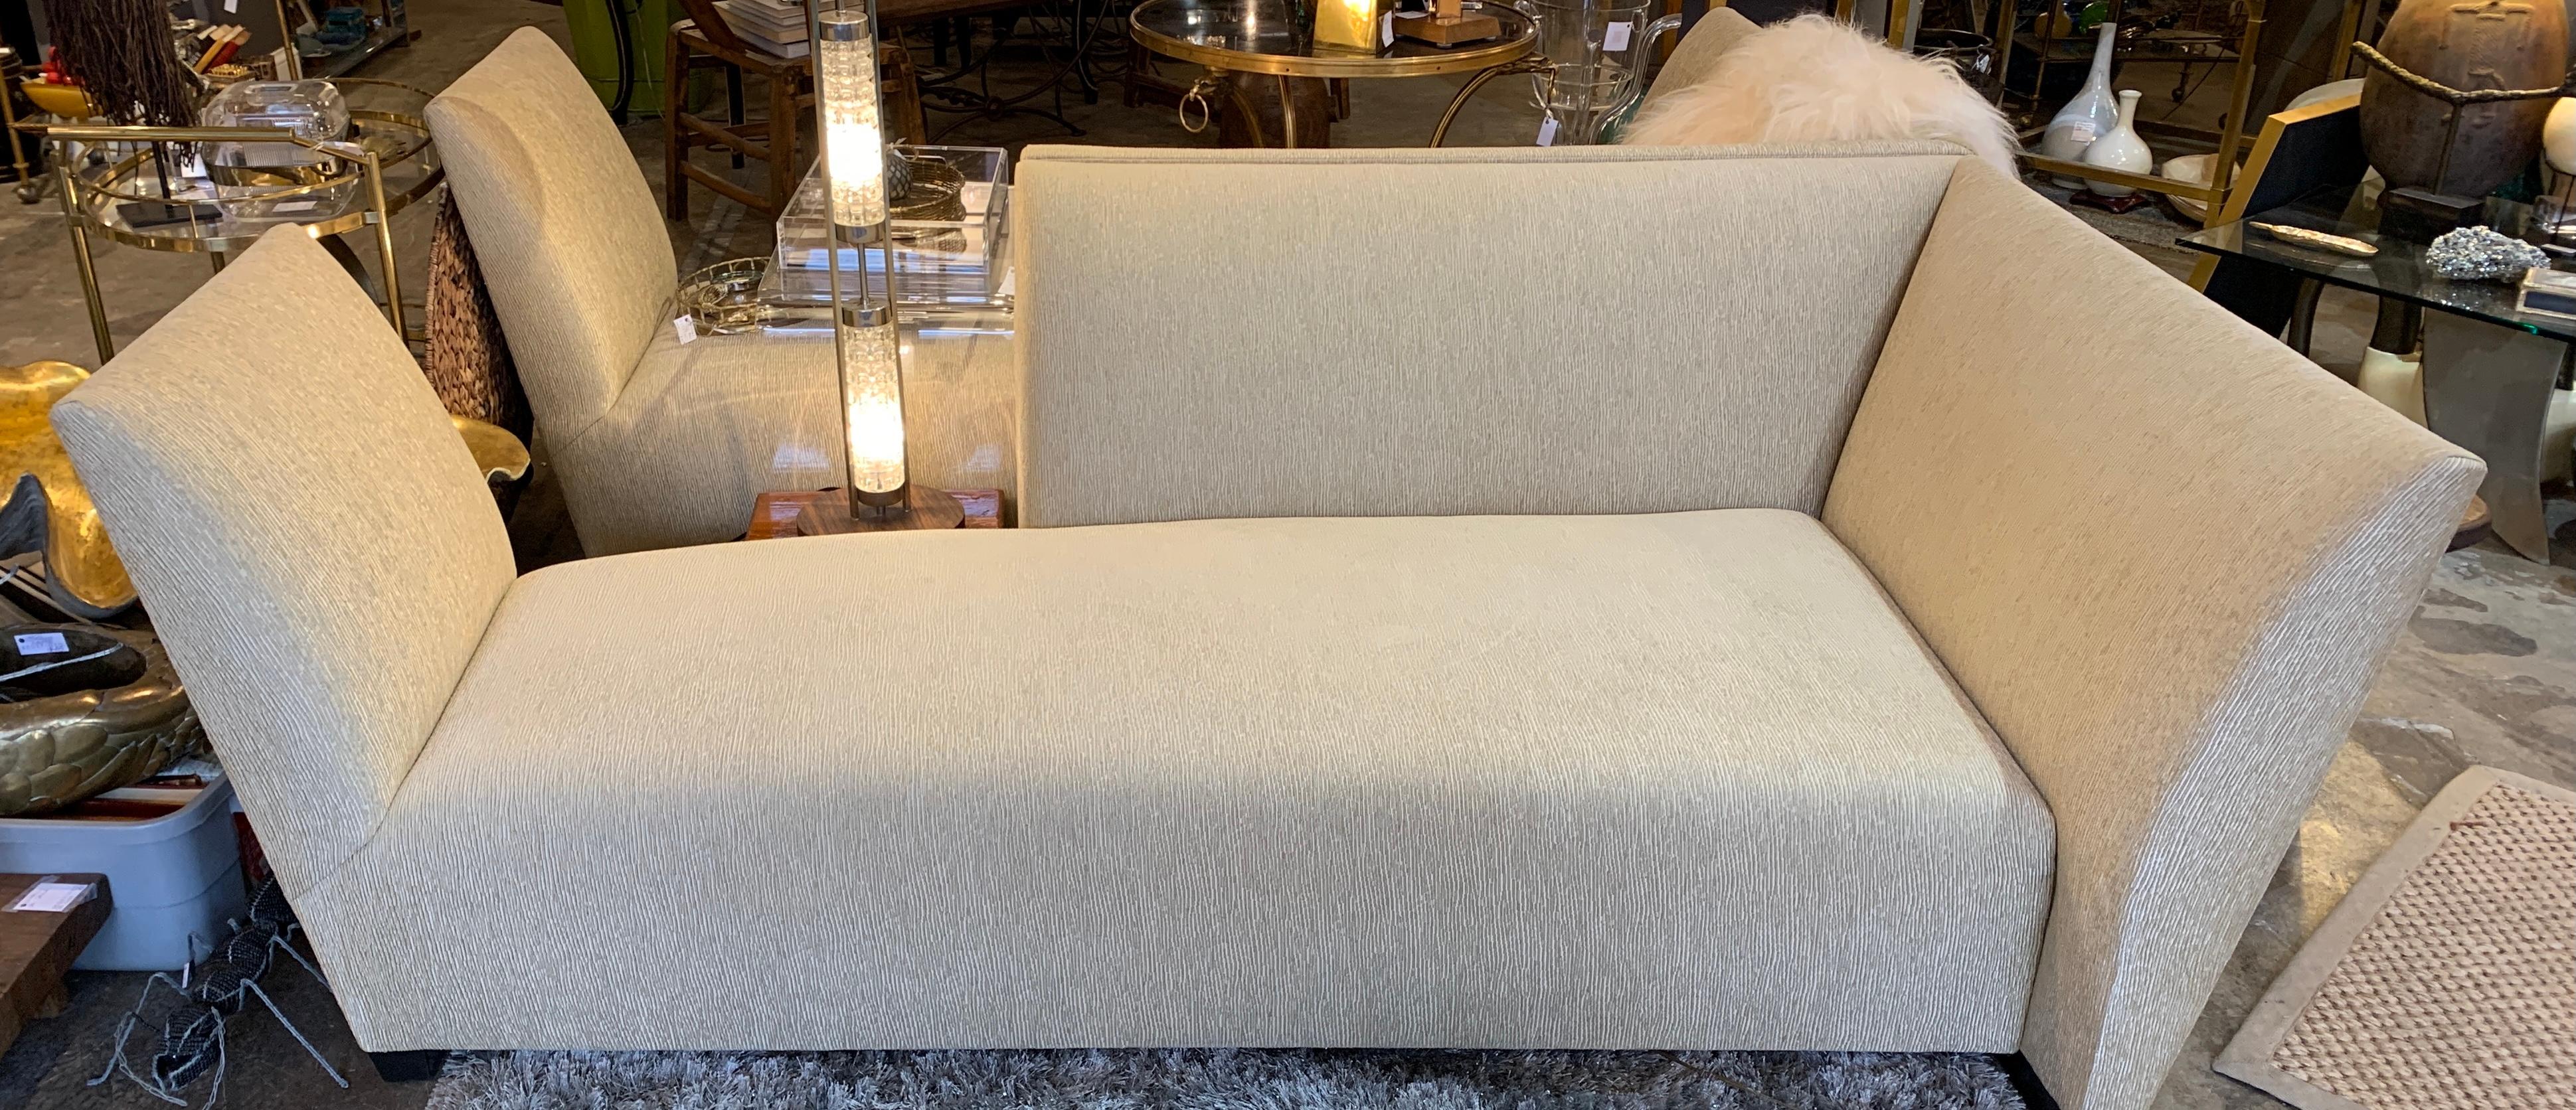 Two Sculptural Donghia Sofas by Joe D'urso with Ecru Chenille Upholstery 6